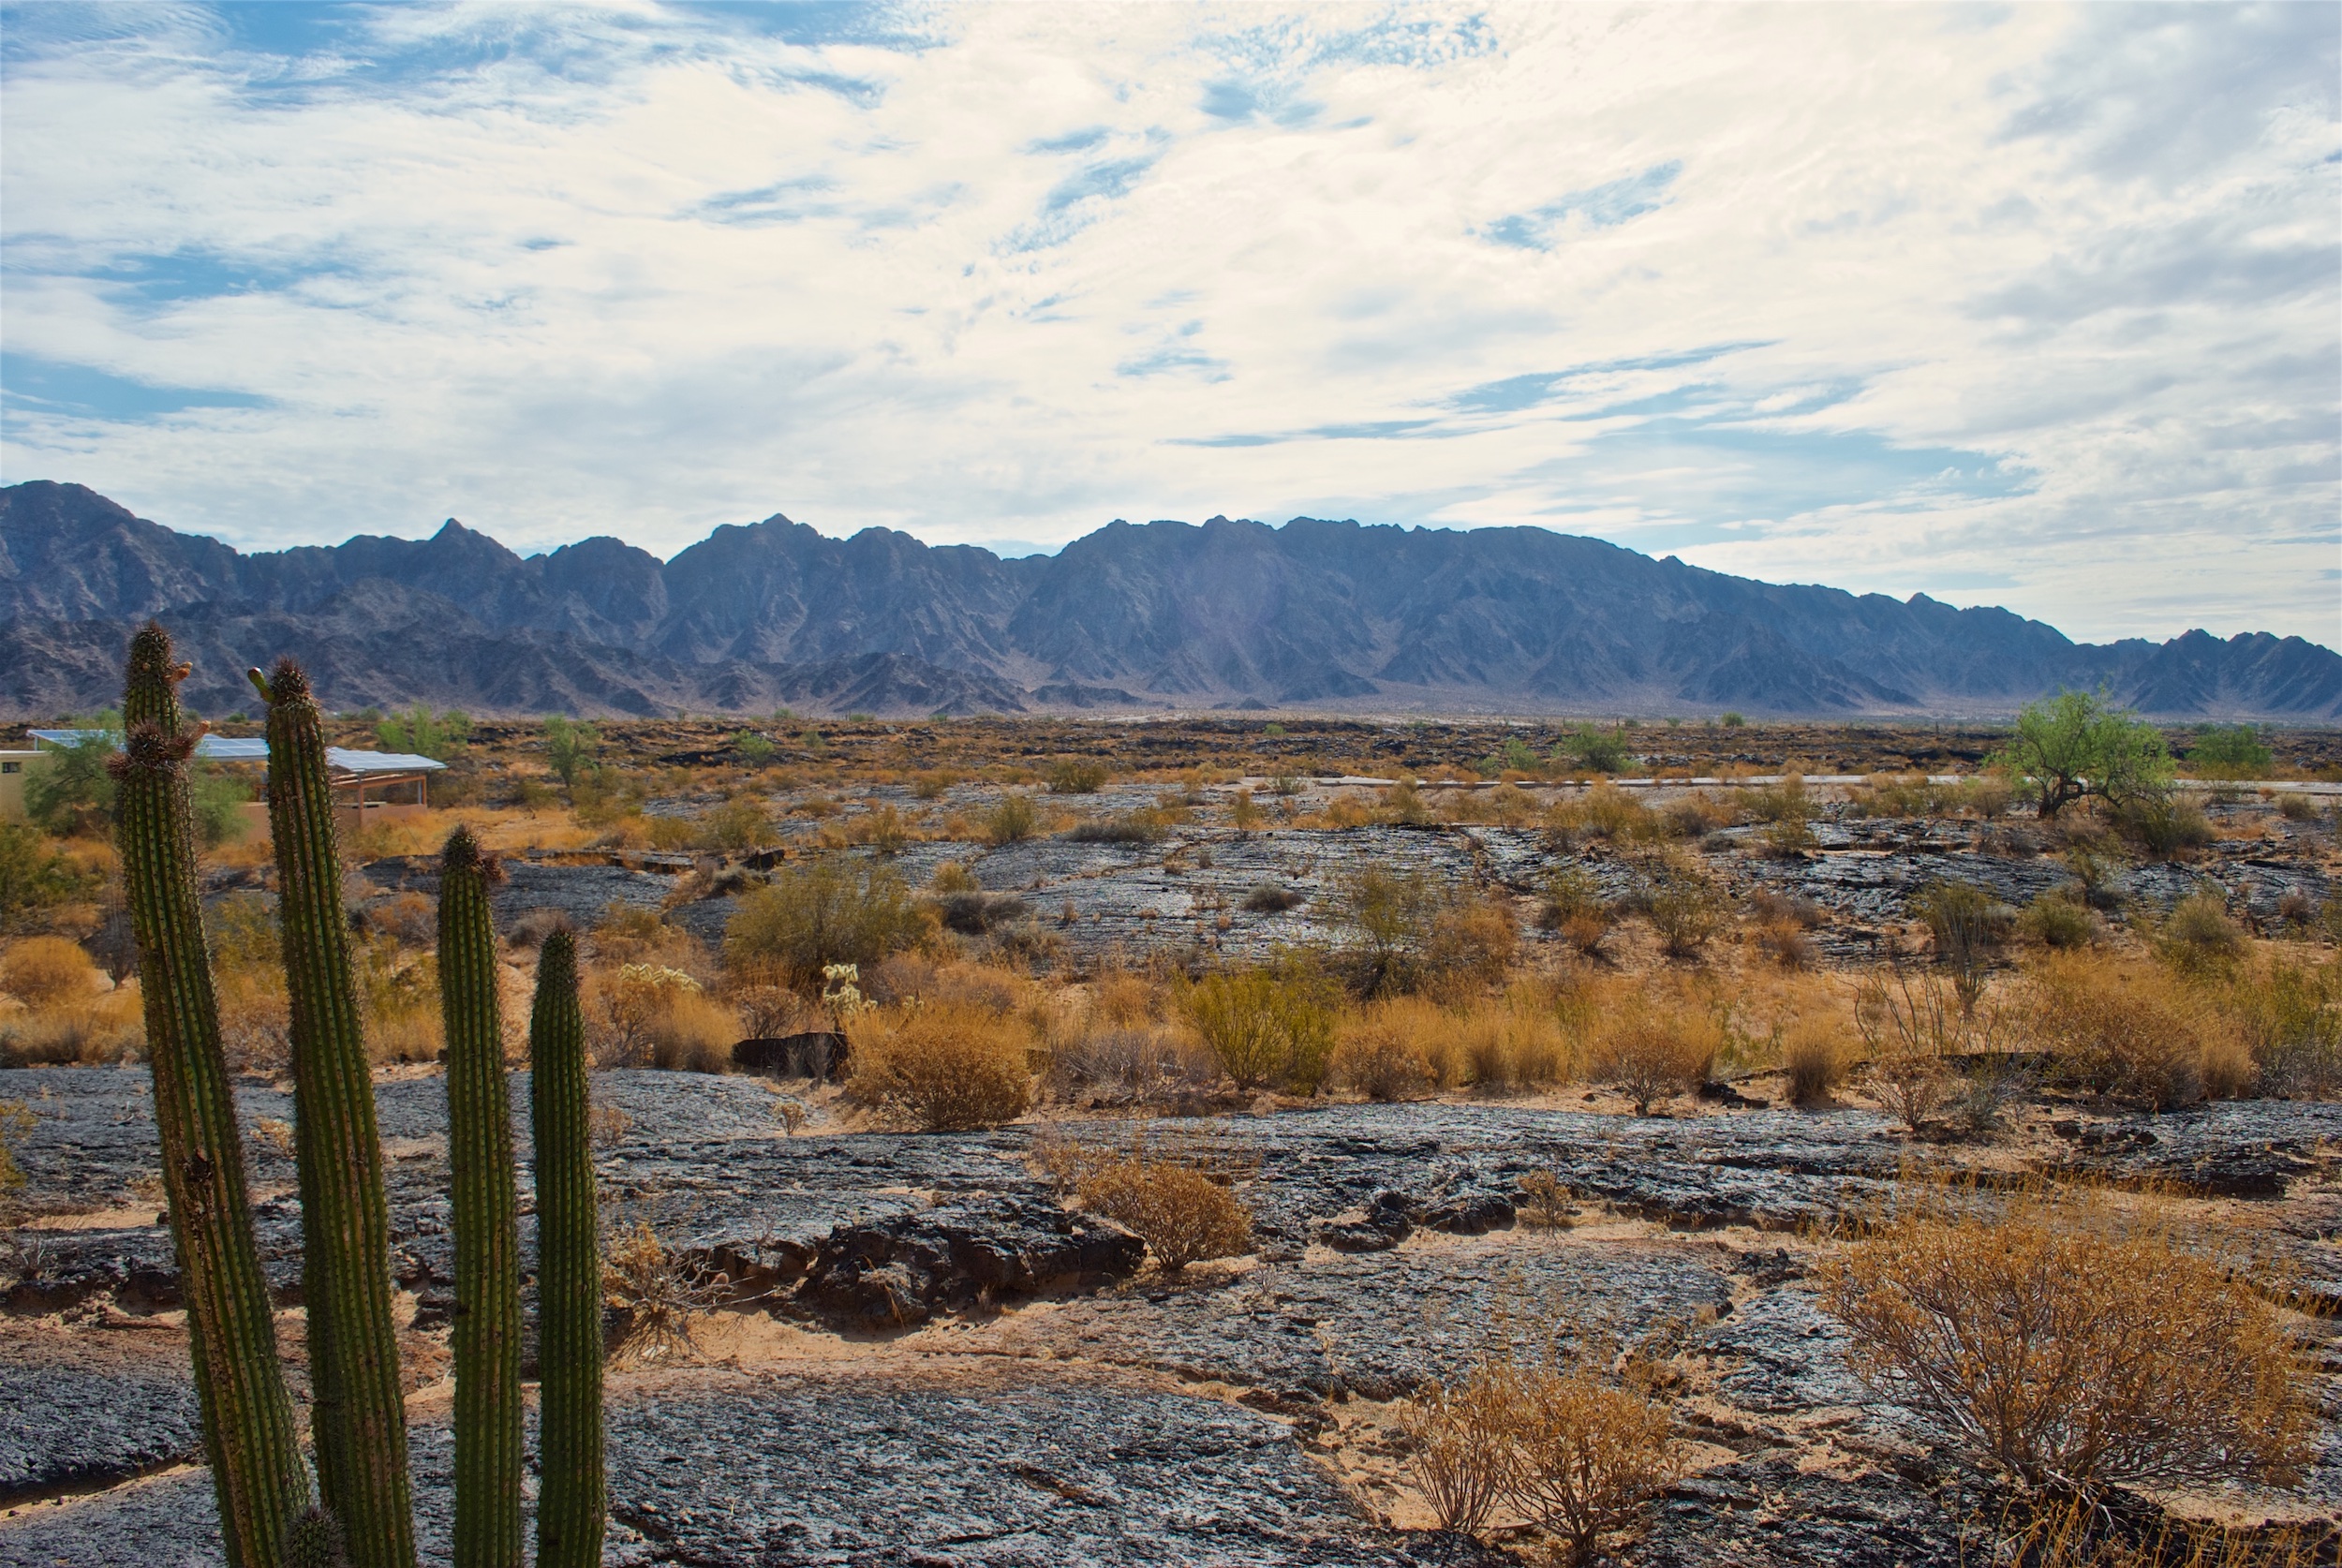 Volcanic landscape at the El Pinacate Biosphere Reserve